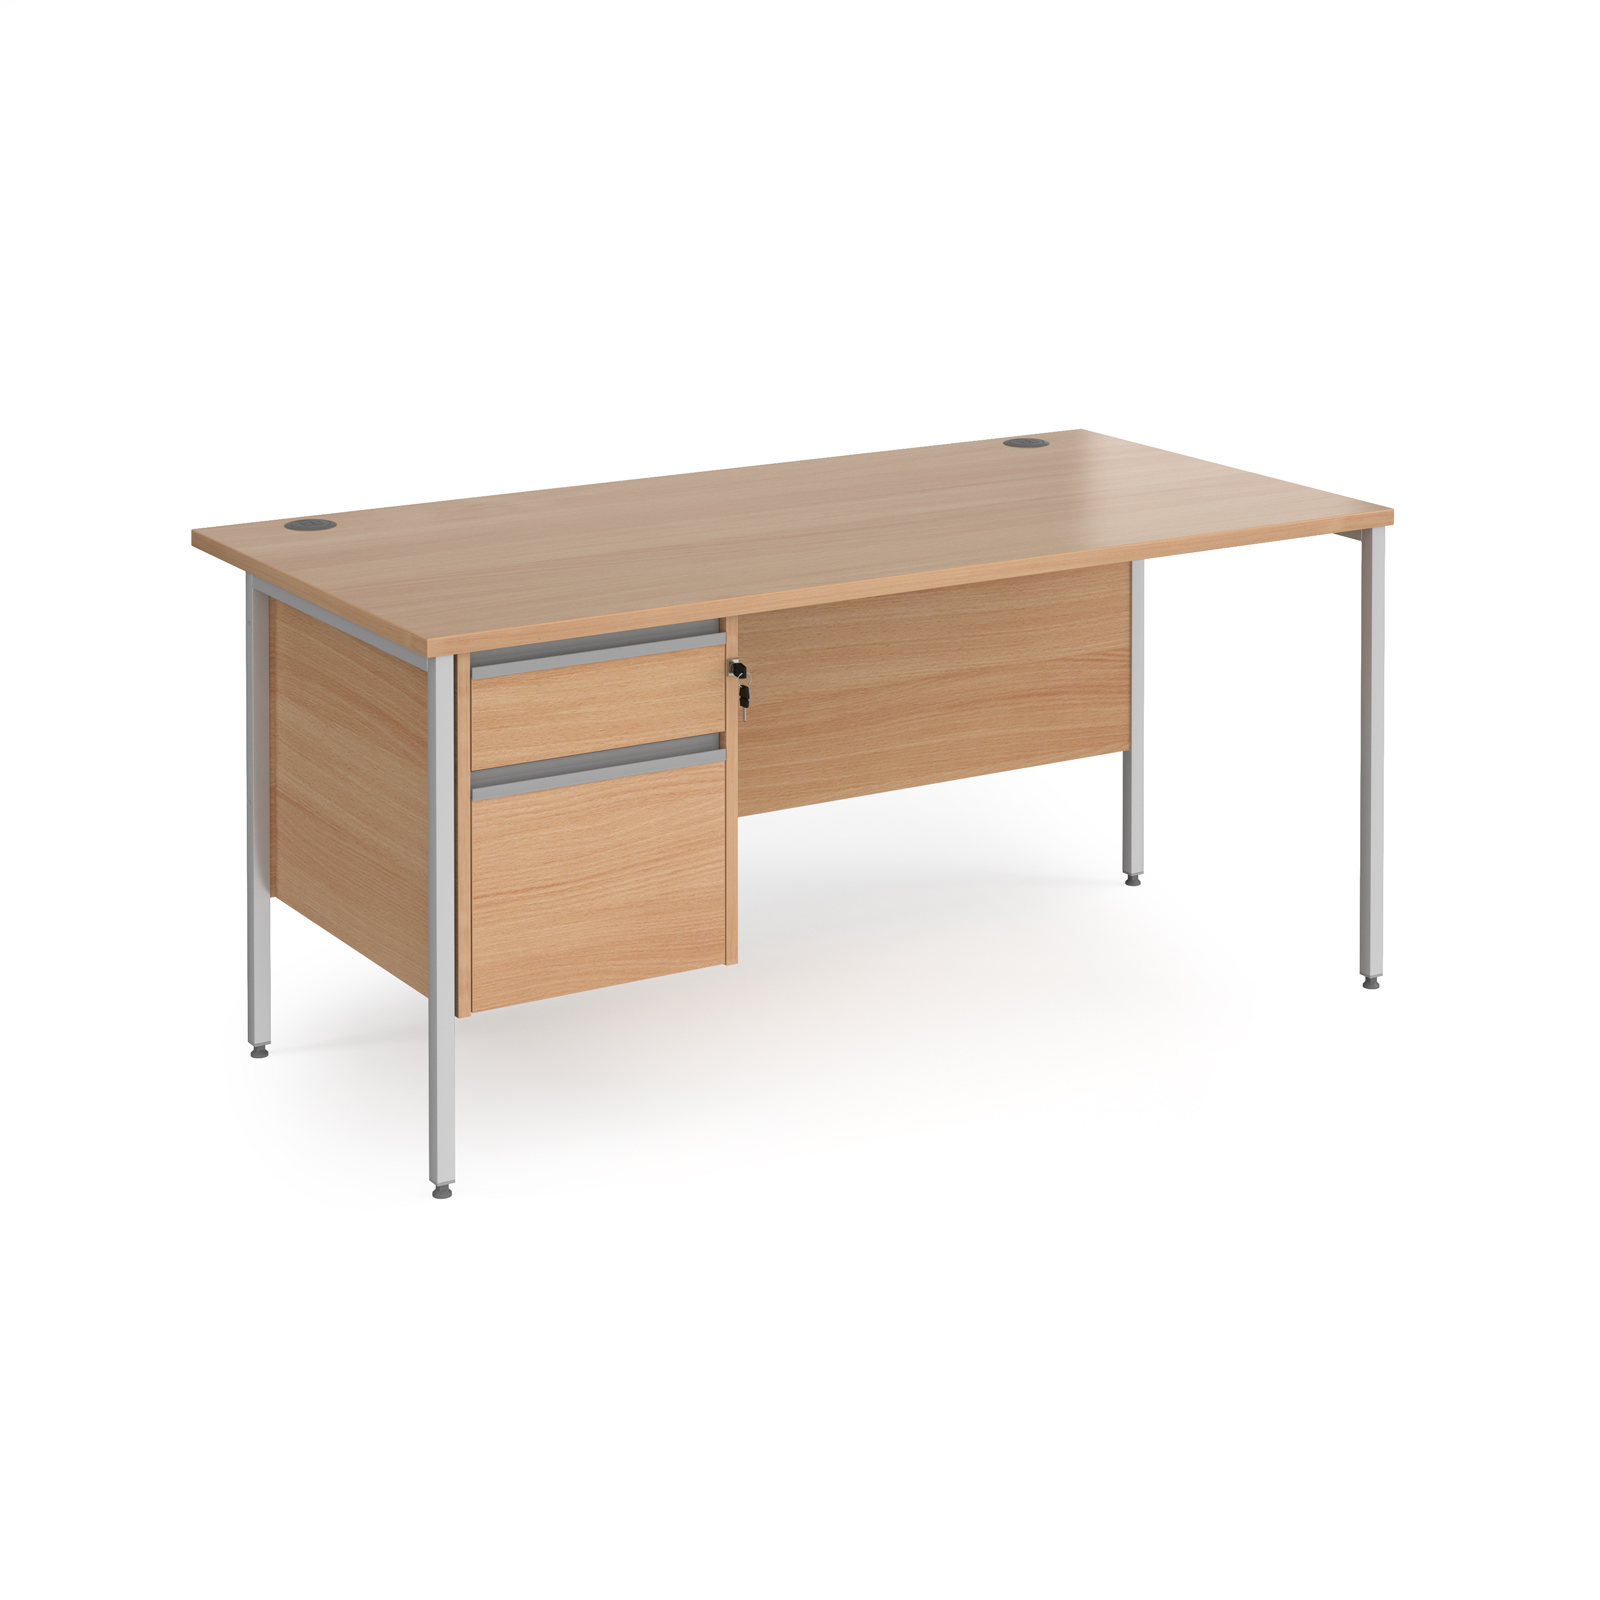 Contract 25 H-Frame straight desk with 2 drawer pedestal